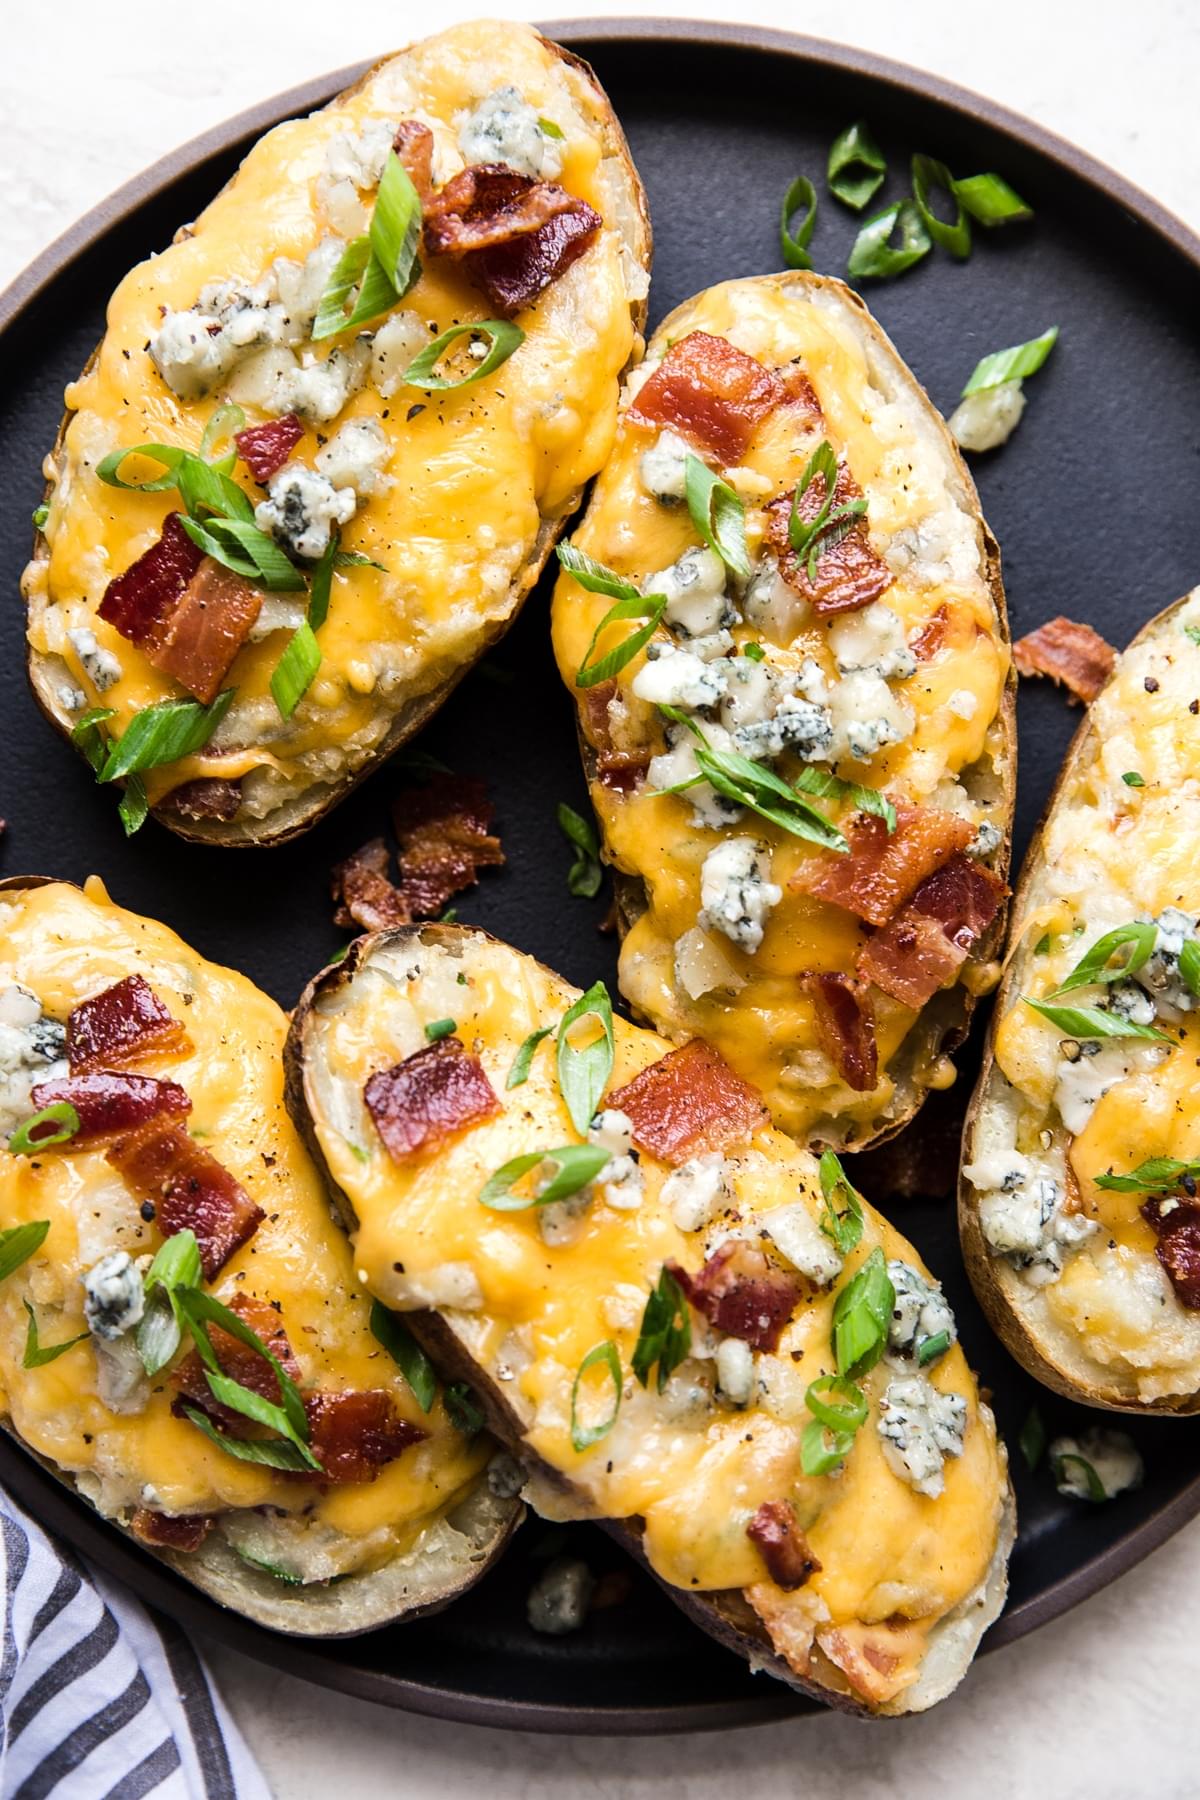 plate of twice baked potatoes topped with melted cheddar cheese, crispy bacon, fresh scallions, and blue cheese